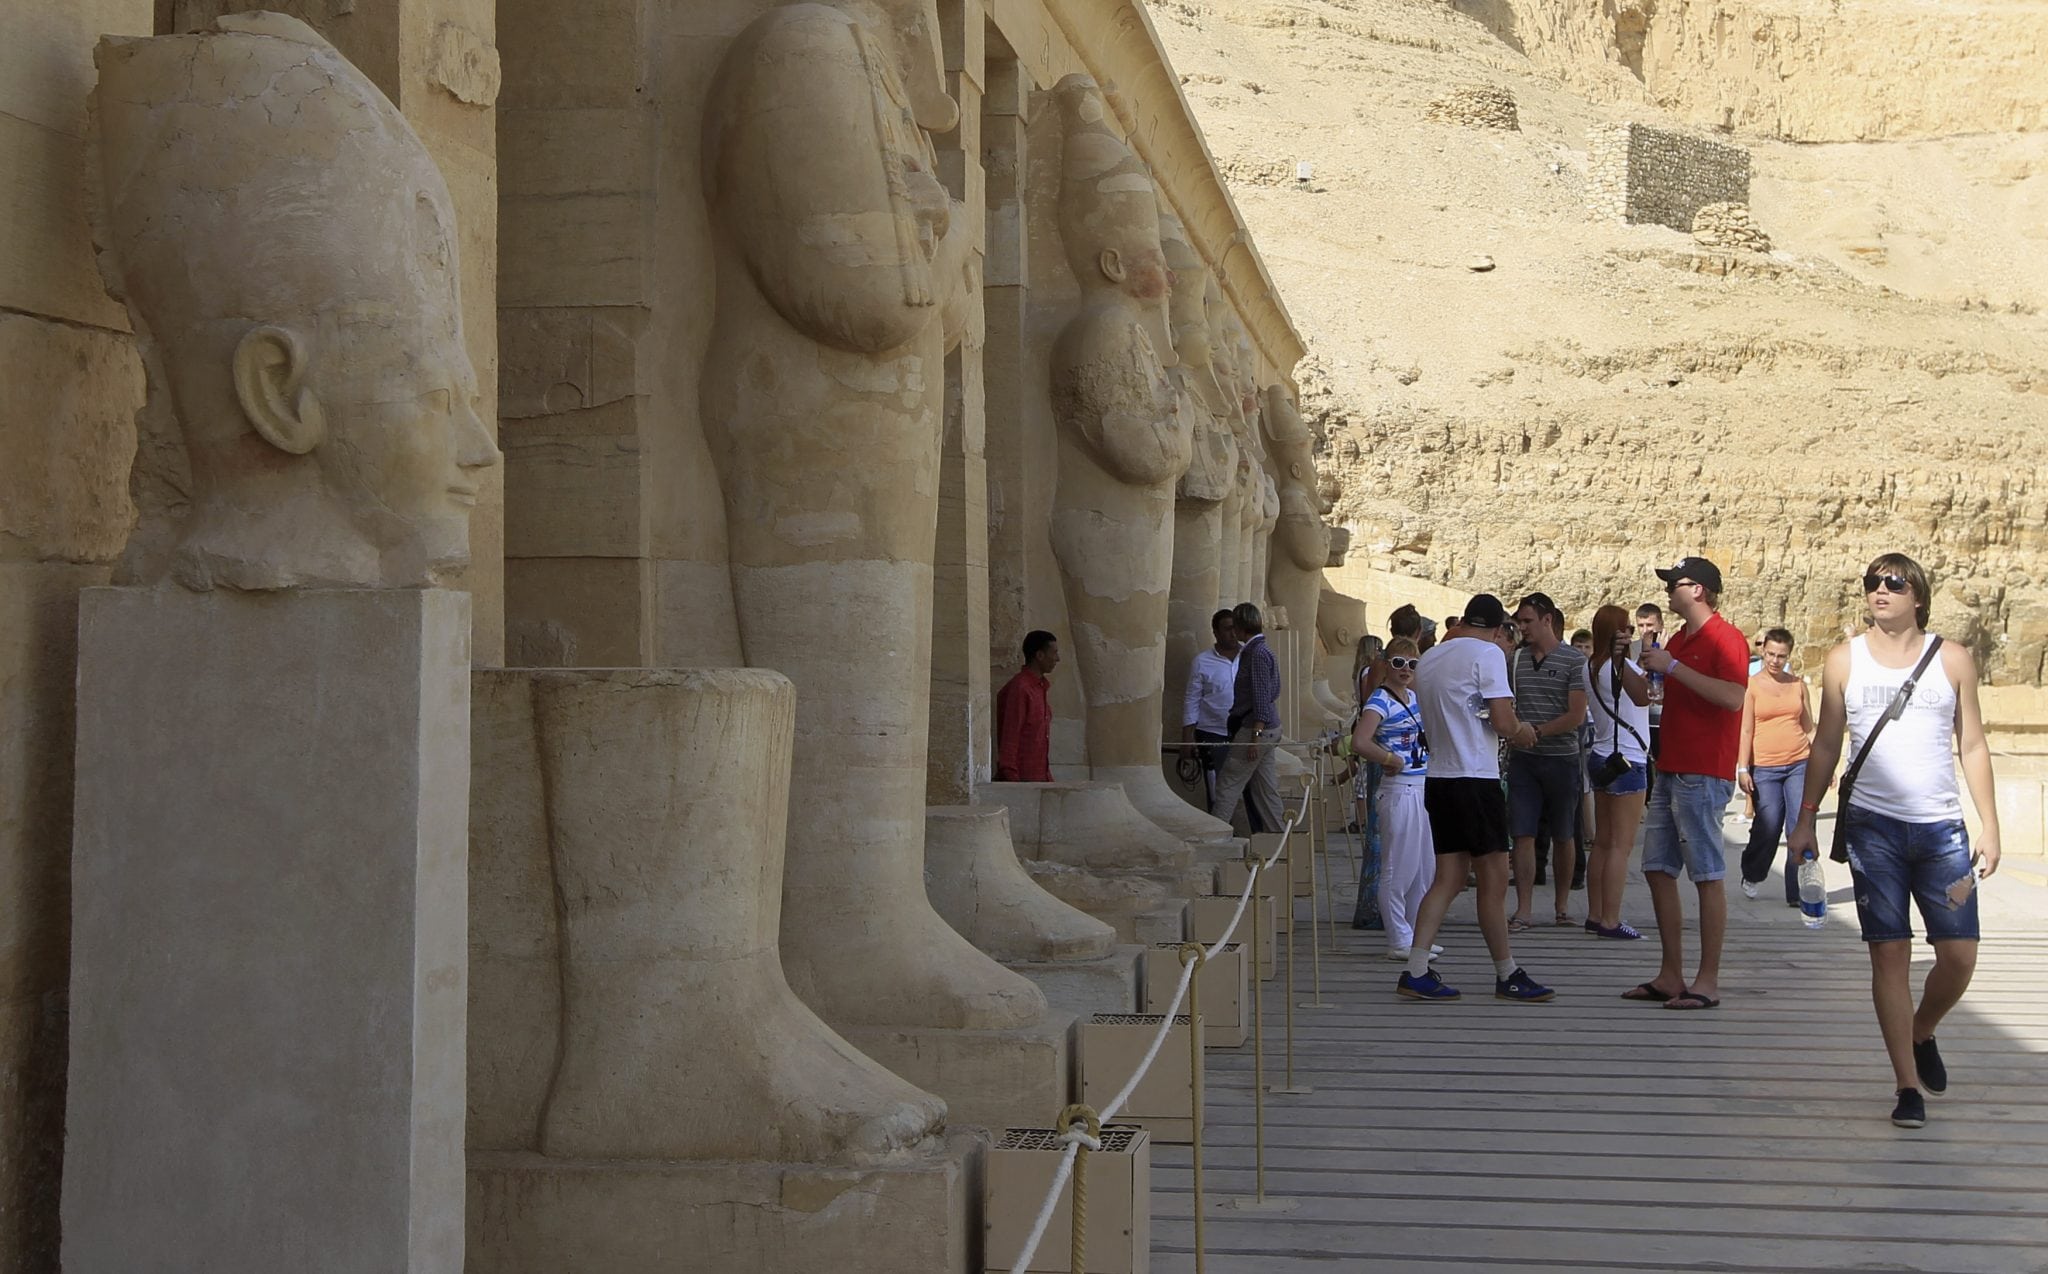 Tourists are seen at the Temple of Hatshepsut, a day after a hot air balloon crash left 19 foreigners dead, in Luxor.